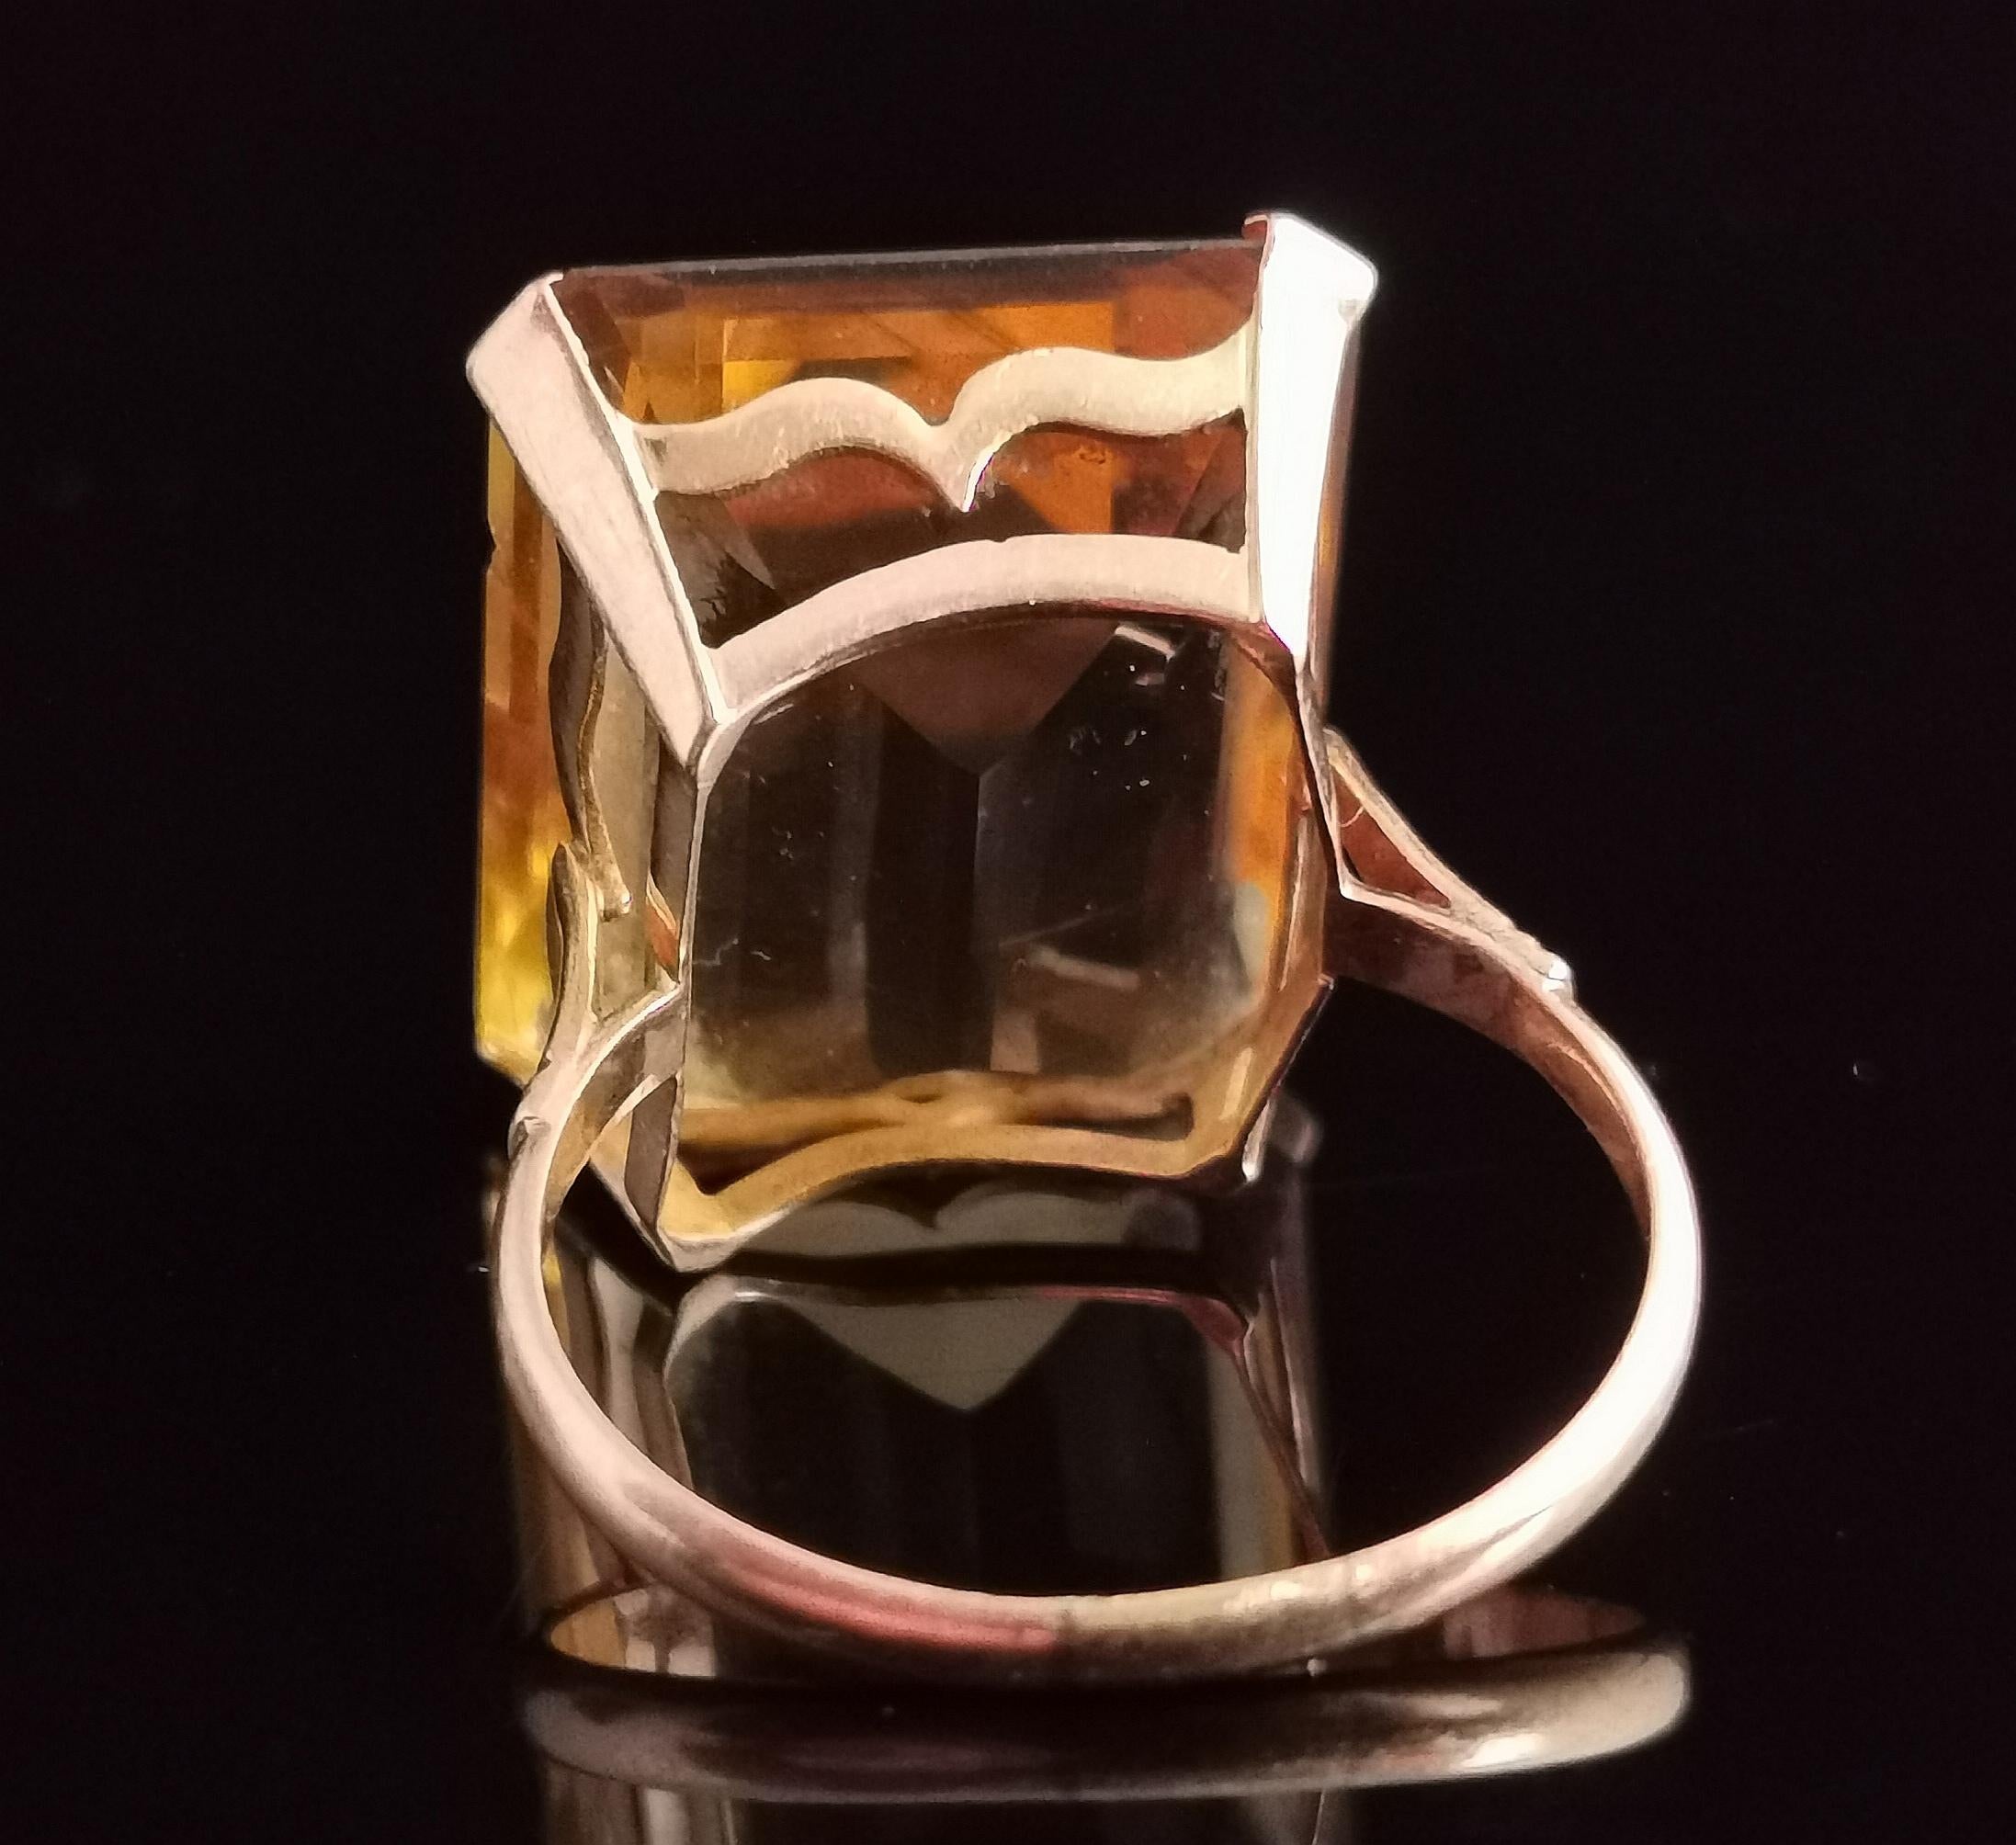 Women's Vintage Citrine Cocktail Ring, Large, 9k Yellow Gold, c1970s